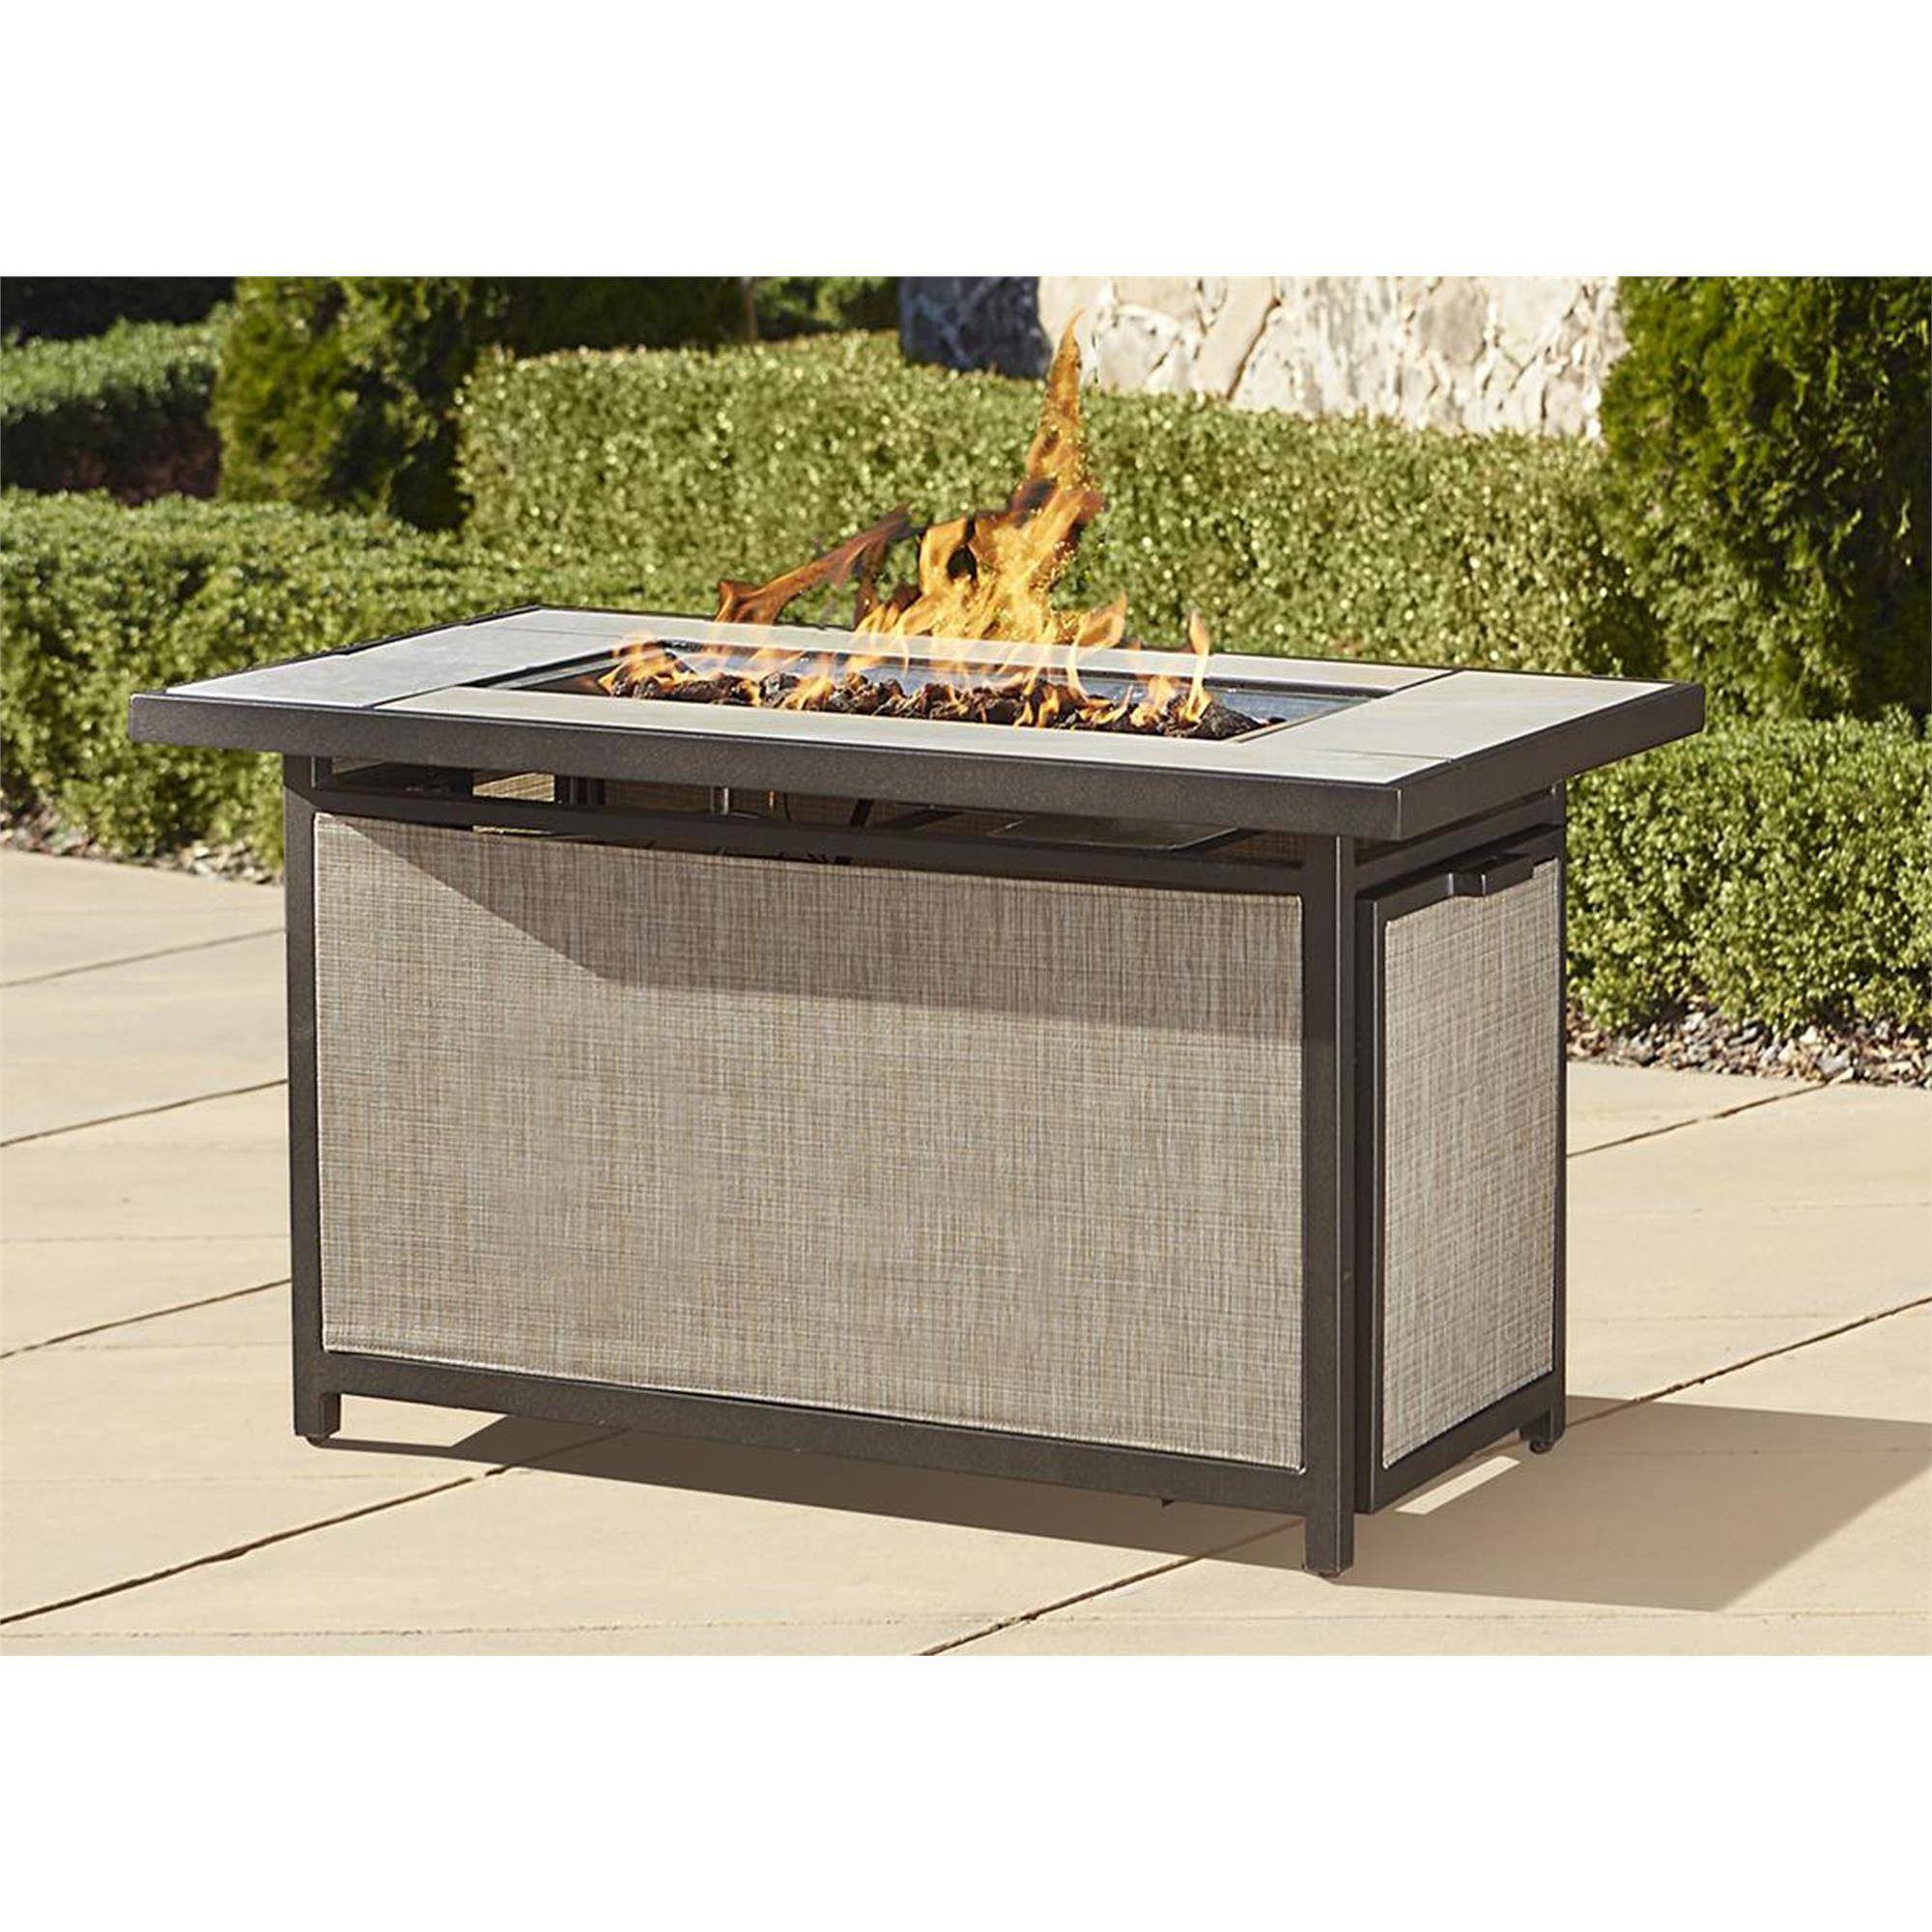 Cosco Outdoor Serene Ridge Aluminum Propane Gas Fire Pit Table with Lid ...